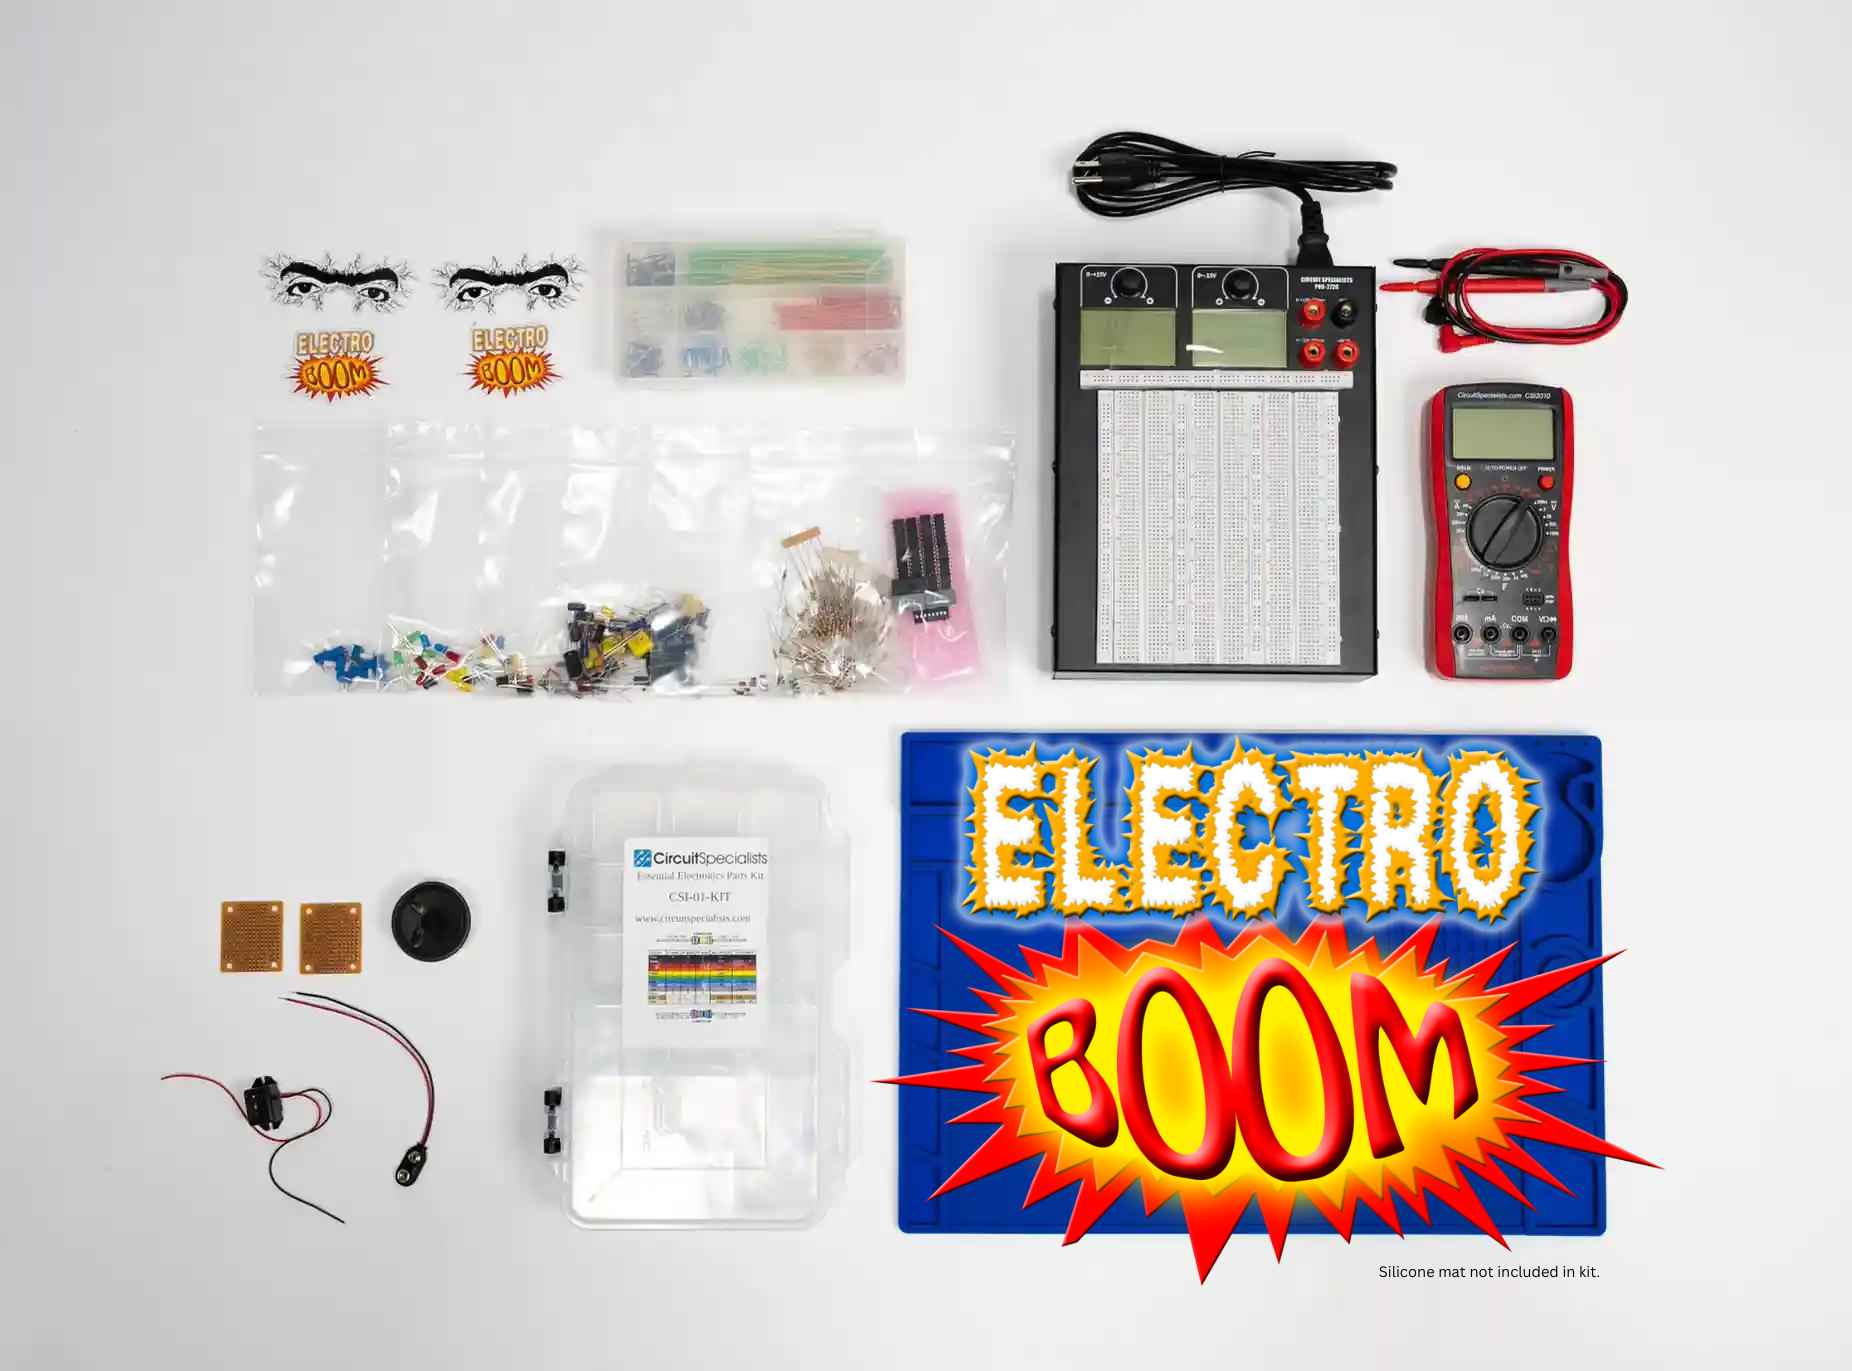 From Project To Kit: So You Want To Sell Electronic Kits